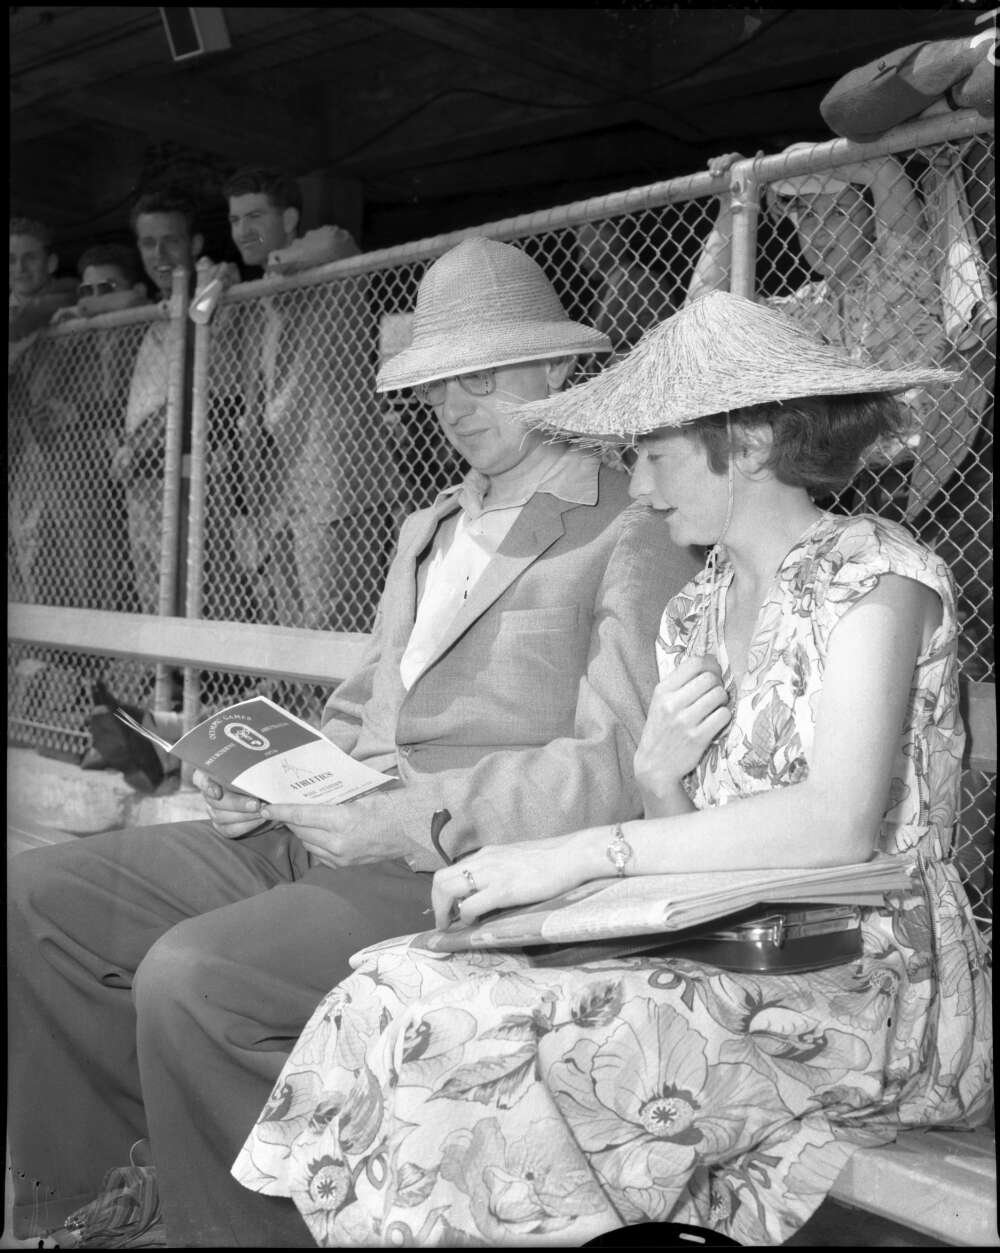 Man and woman sitting in the stands of a sports arena wearing nice clothes andsunhats